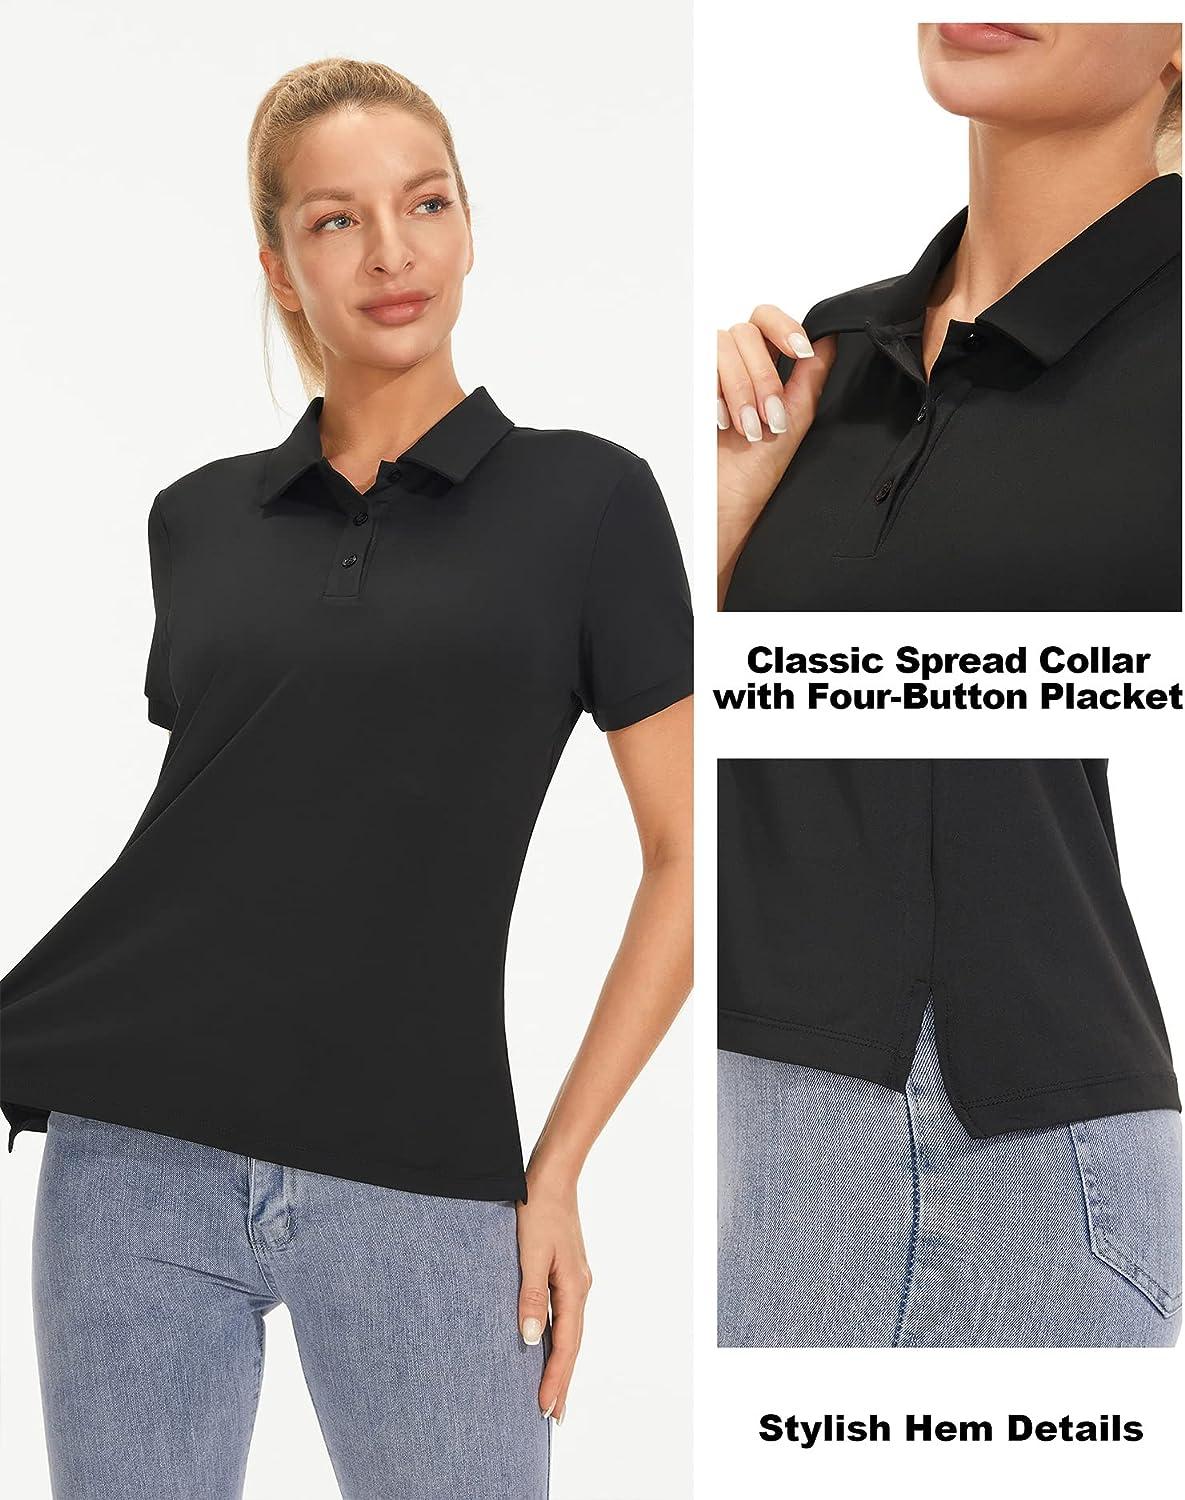 Soft Women's Shirts and Tops